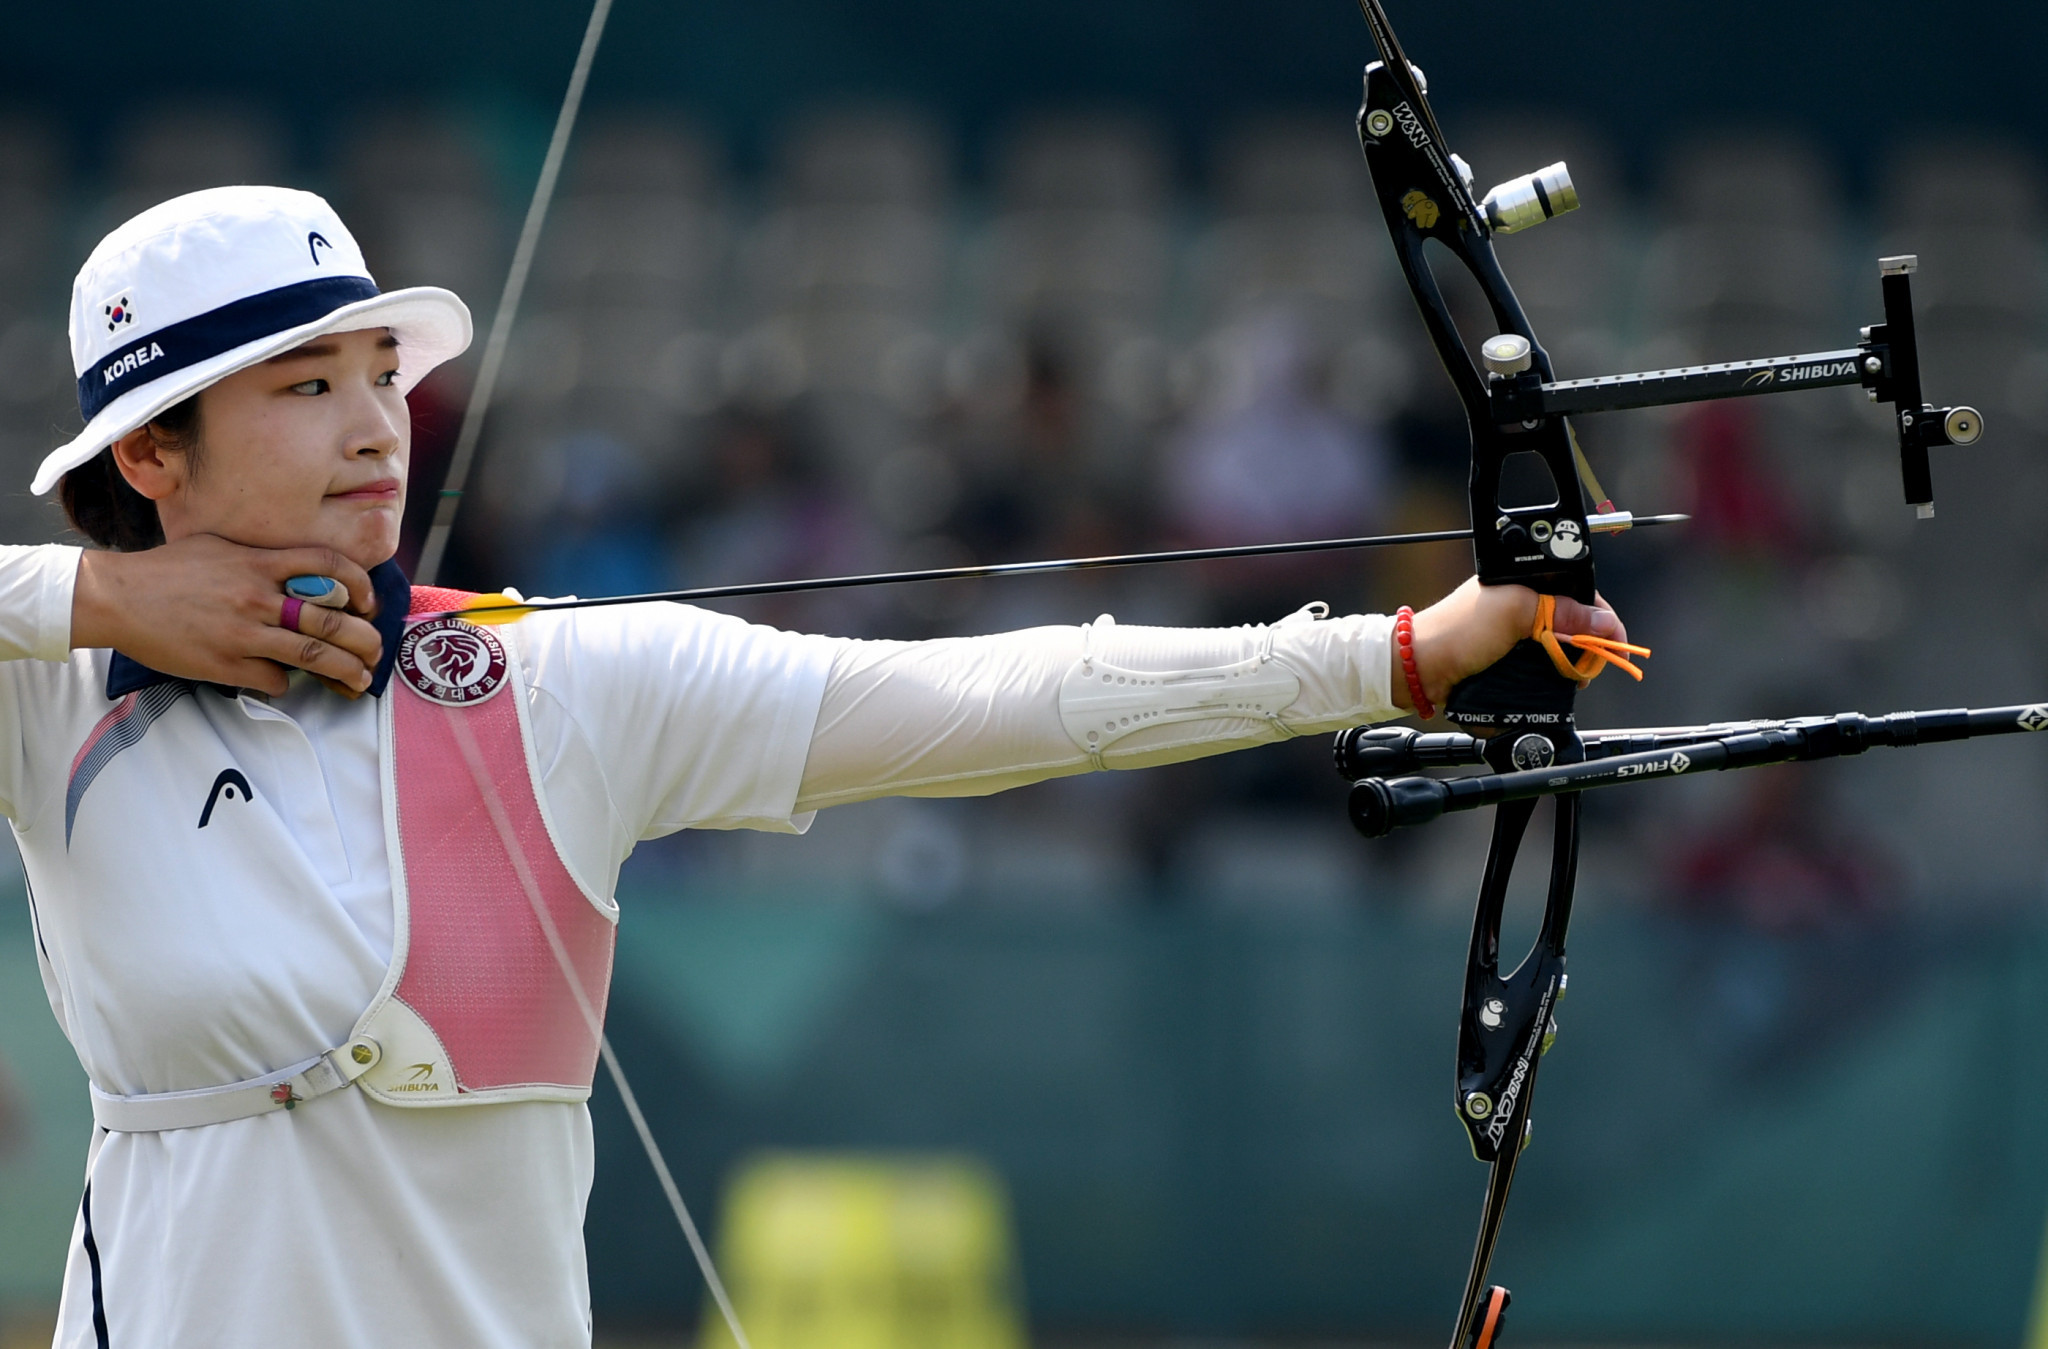 Kang tops women's recurve qualification standings at Indoor Archery World Series in Nîmes